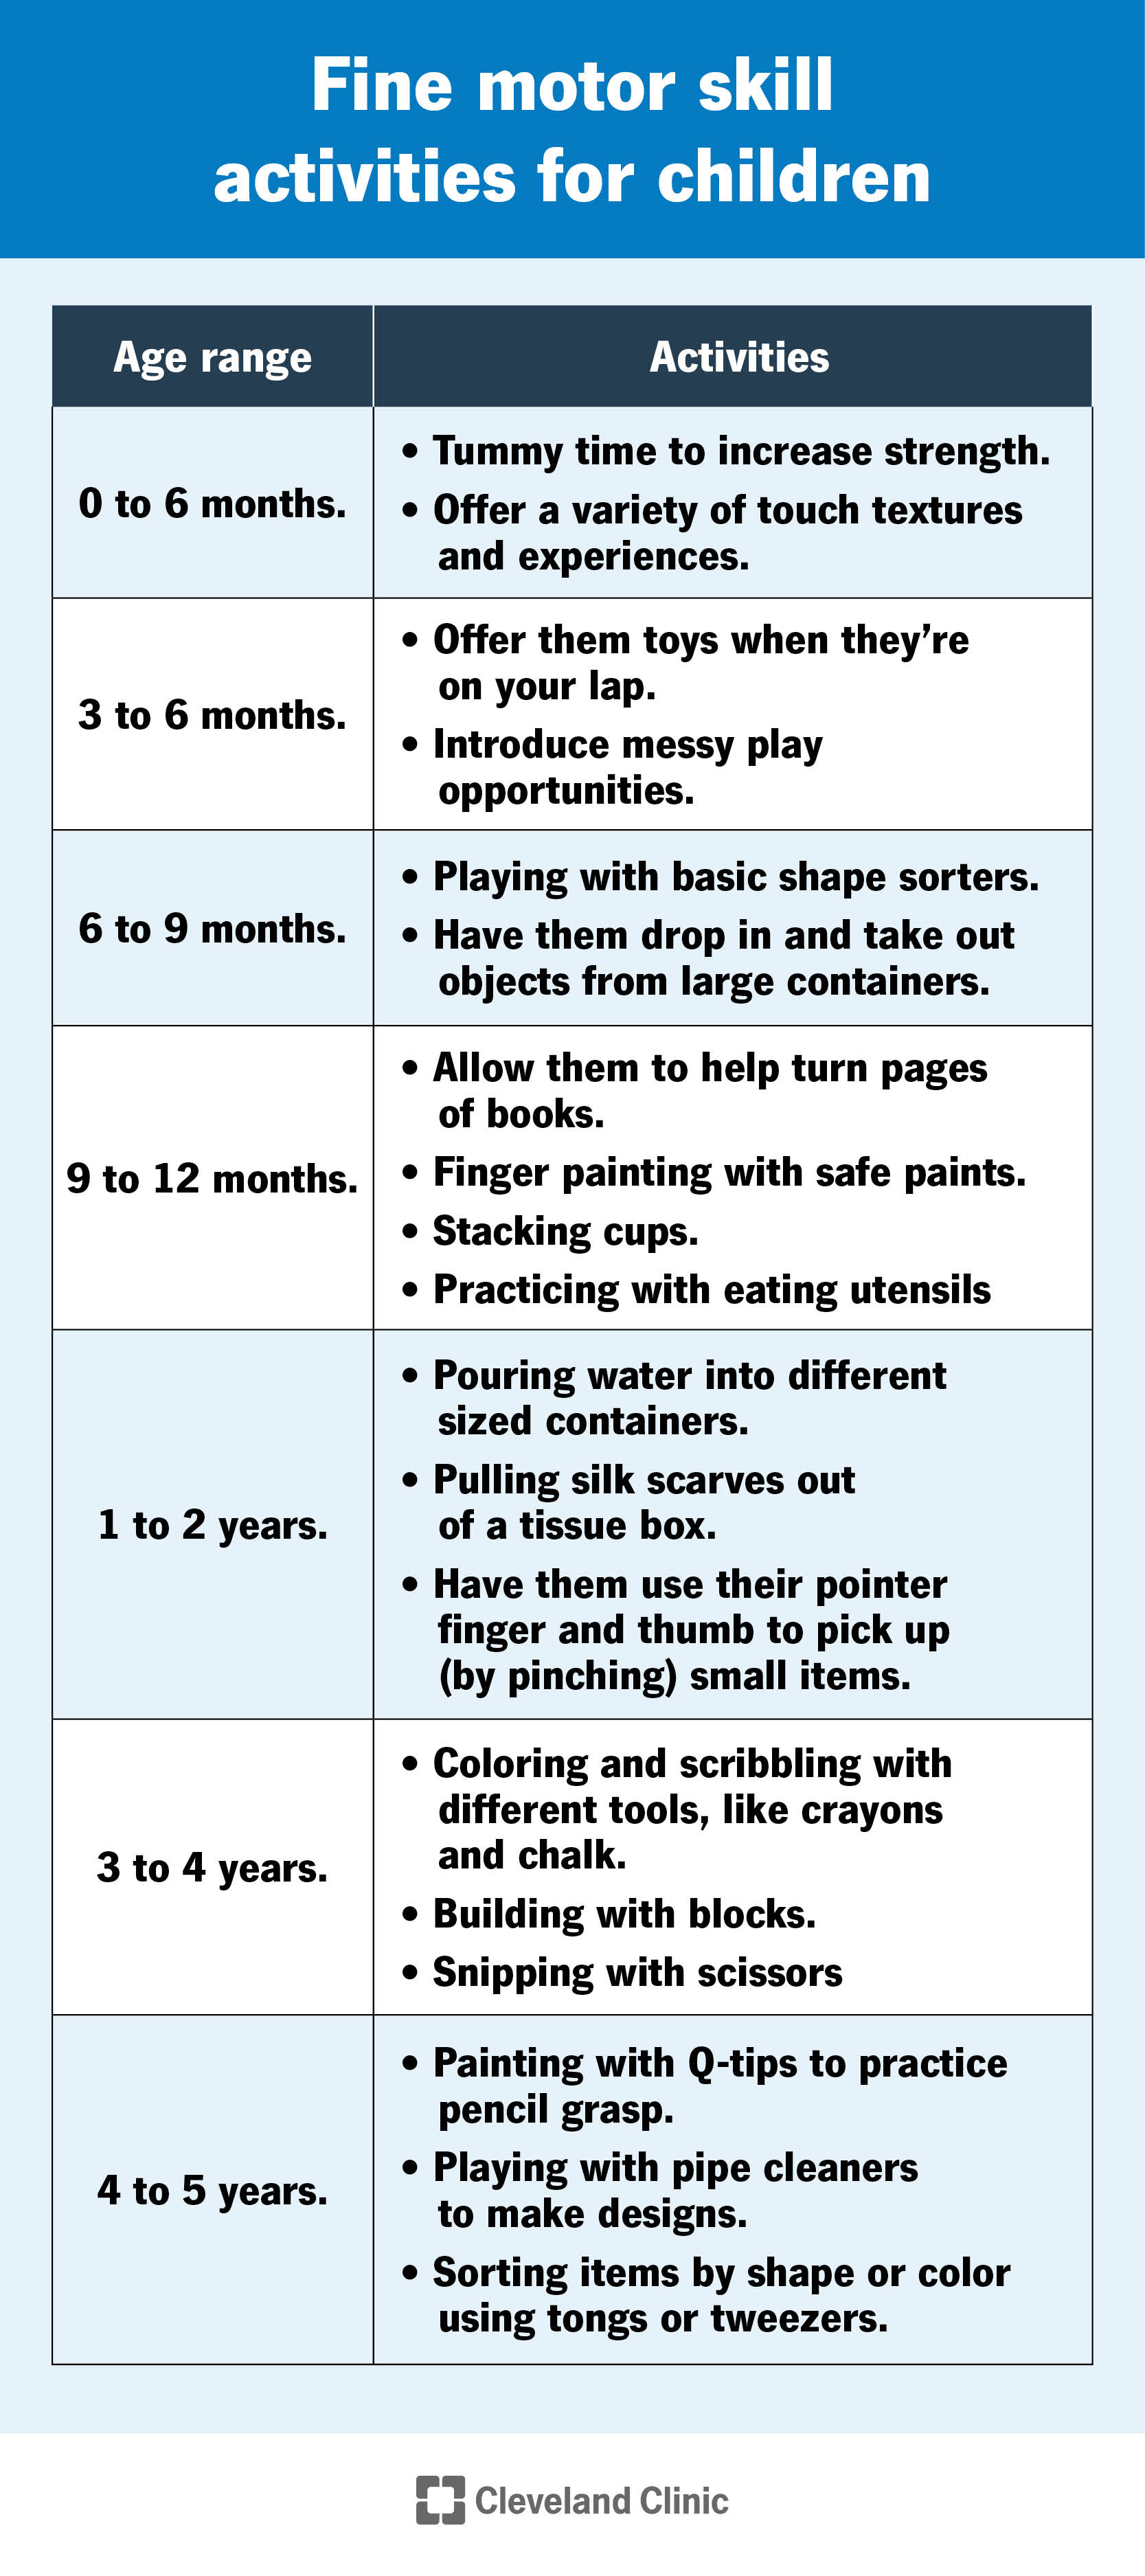 Examples of fine motor skill milestones ranging from 0 to 6 months to 6 to 7 years.